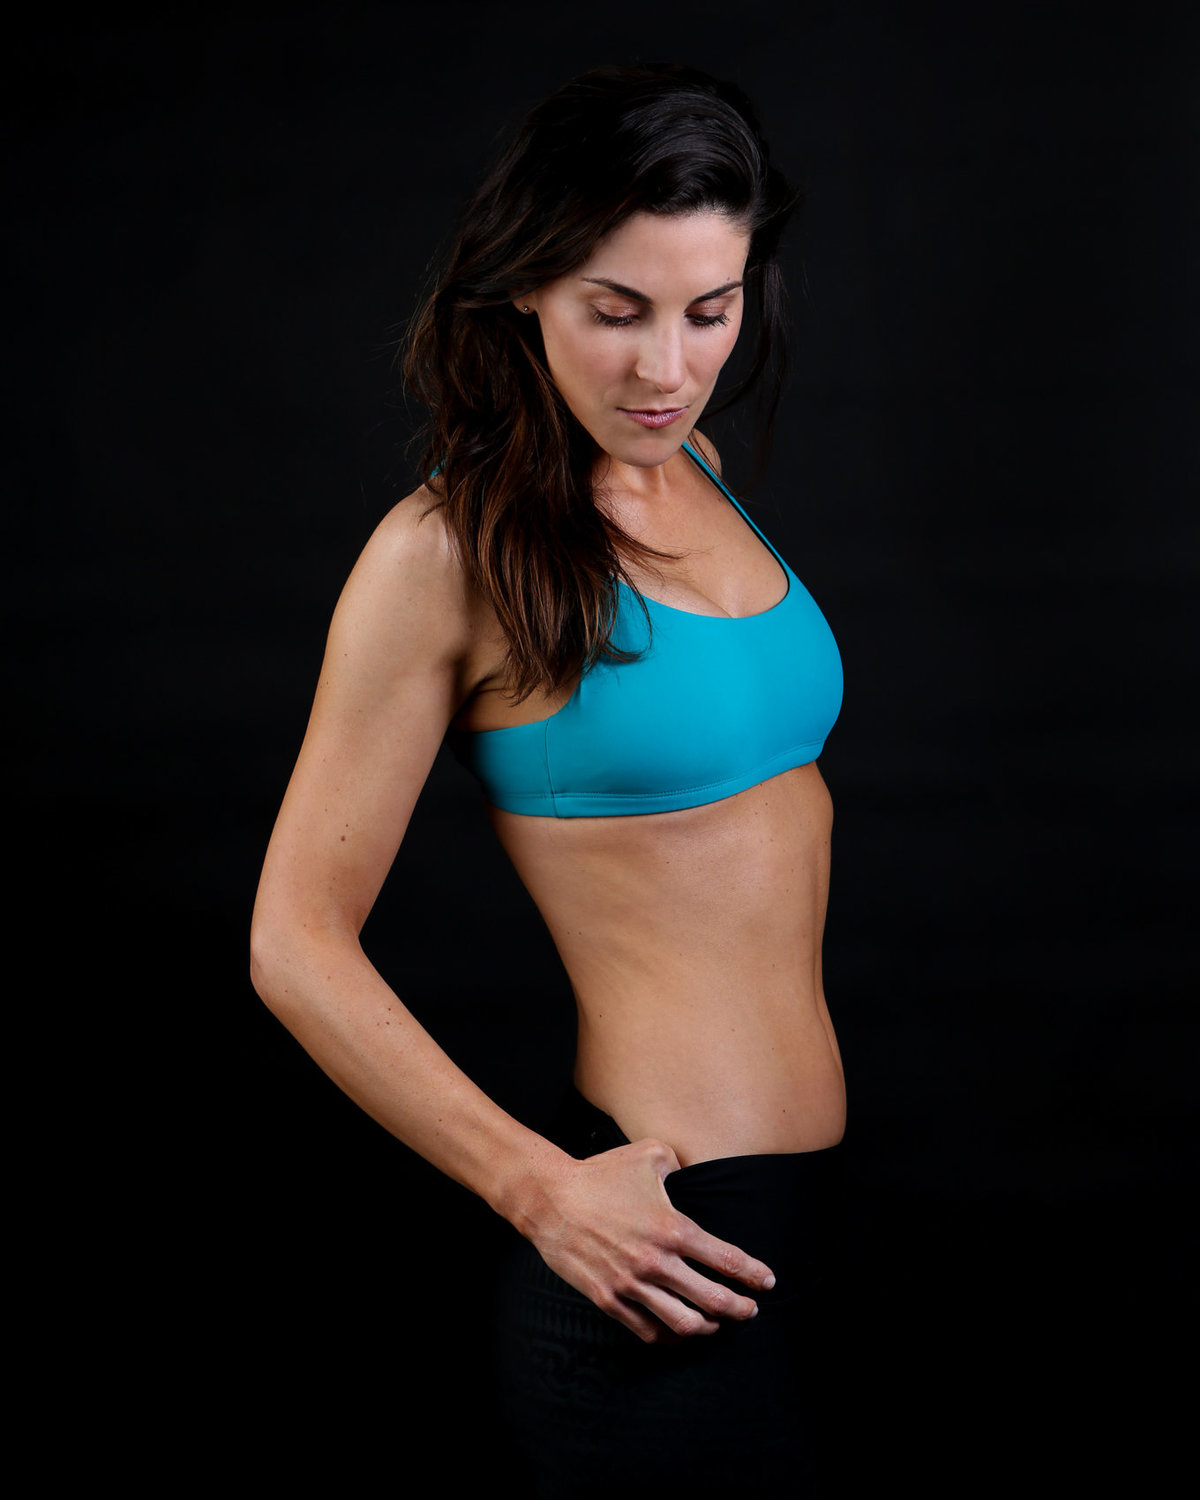 In-Studio with Black Backdrop Fitness Photos